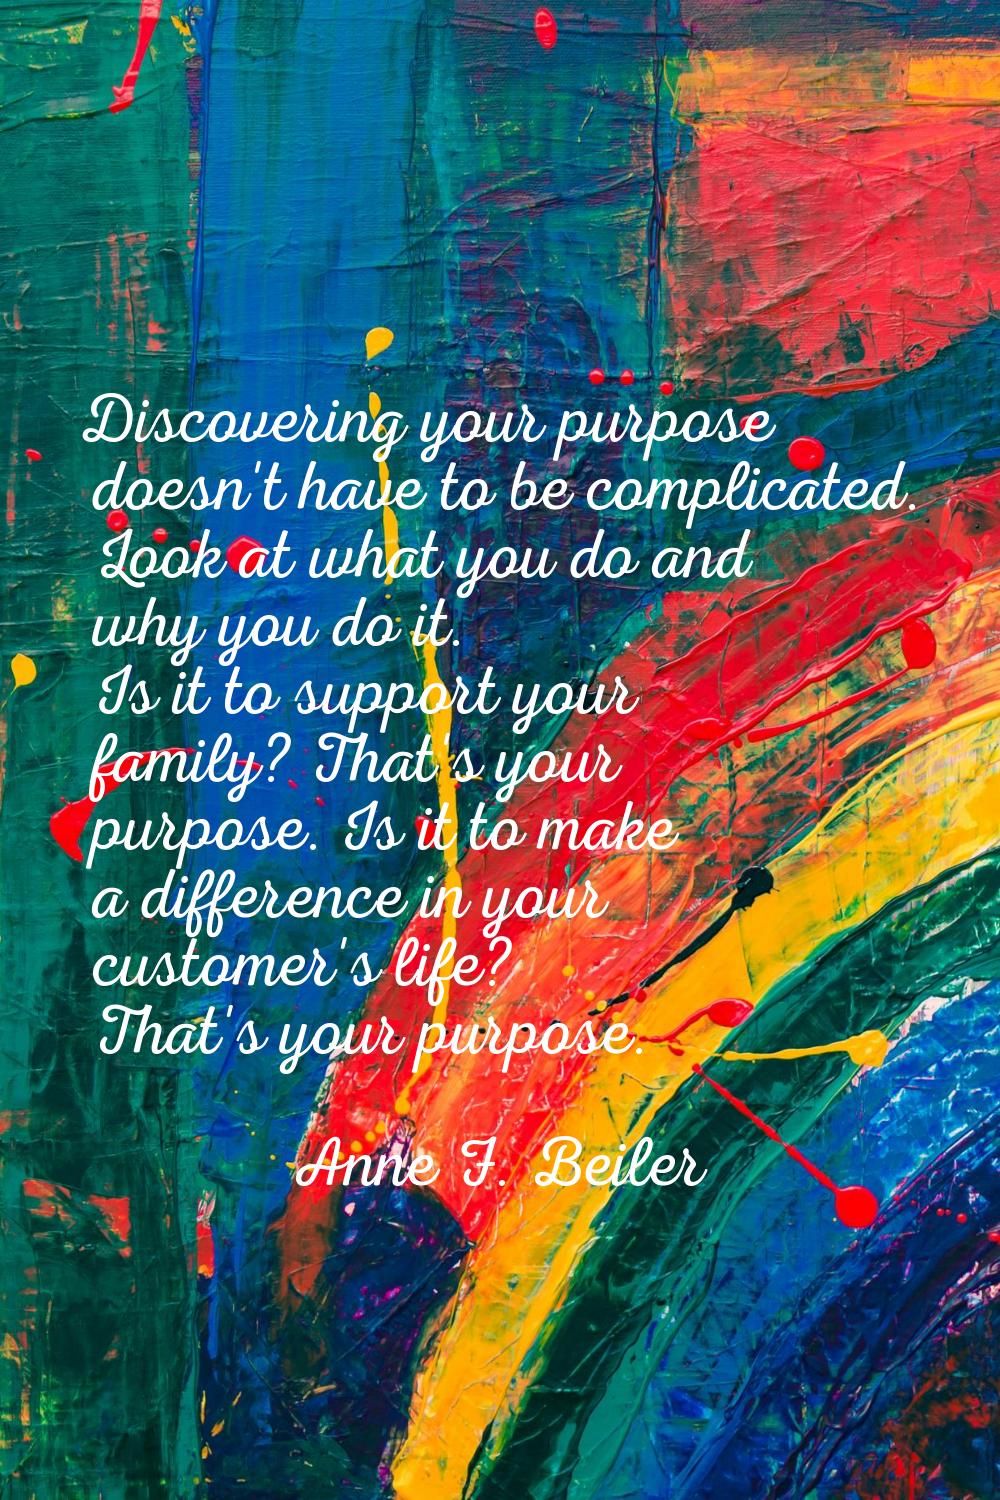 Discovering your purpose doesn't have to be complicated. Look at what you do and why you do it. Is 